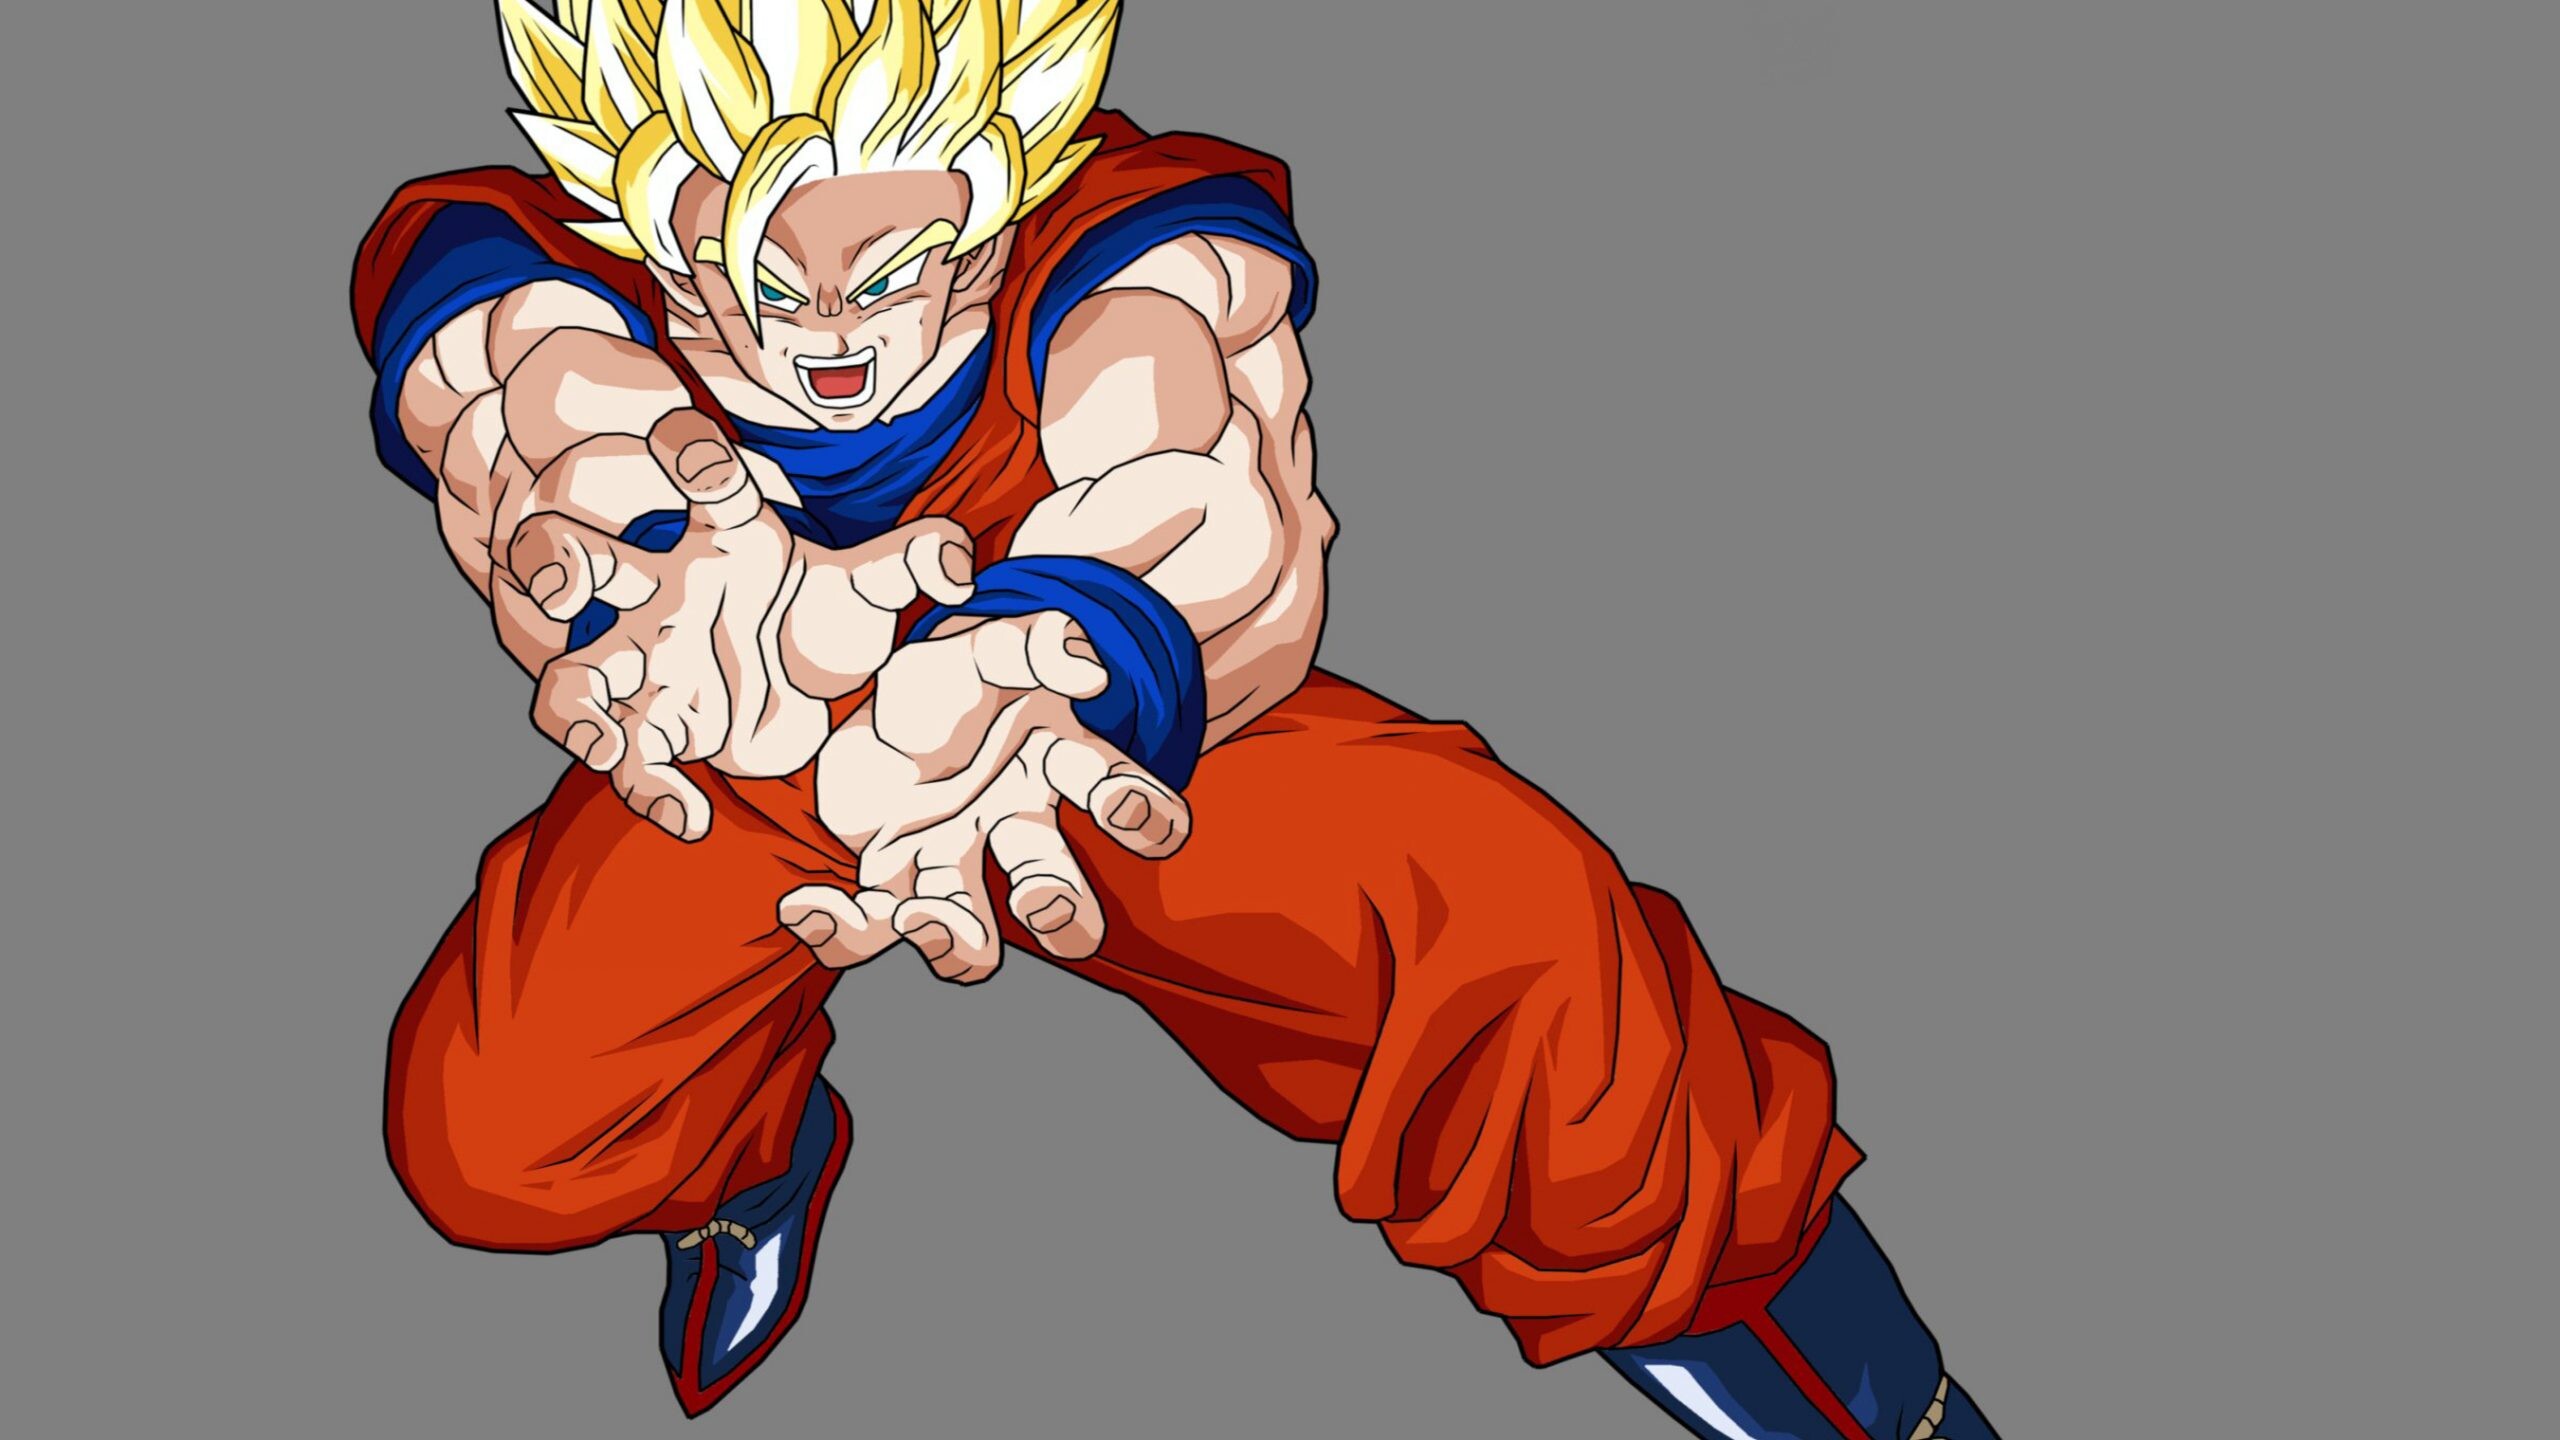 Goku Kamehameha: SSJ2, Energy attack with cupped hands, Energy concentrated into a single point. 2560x1440 HD Wallpaper.